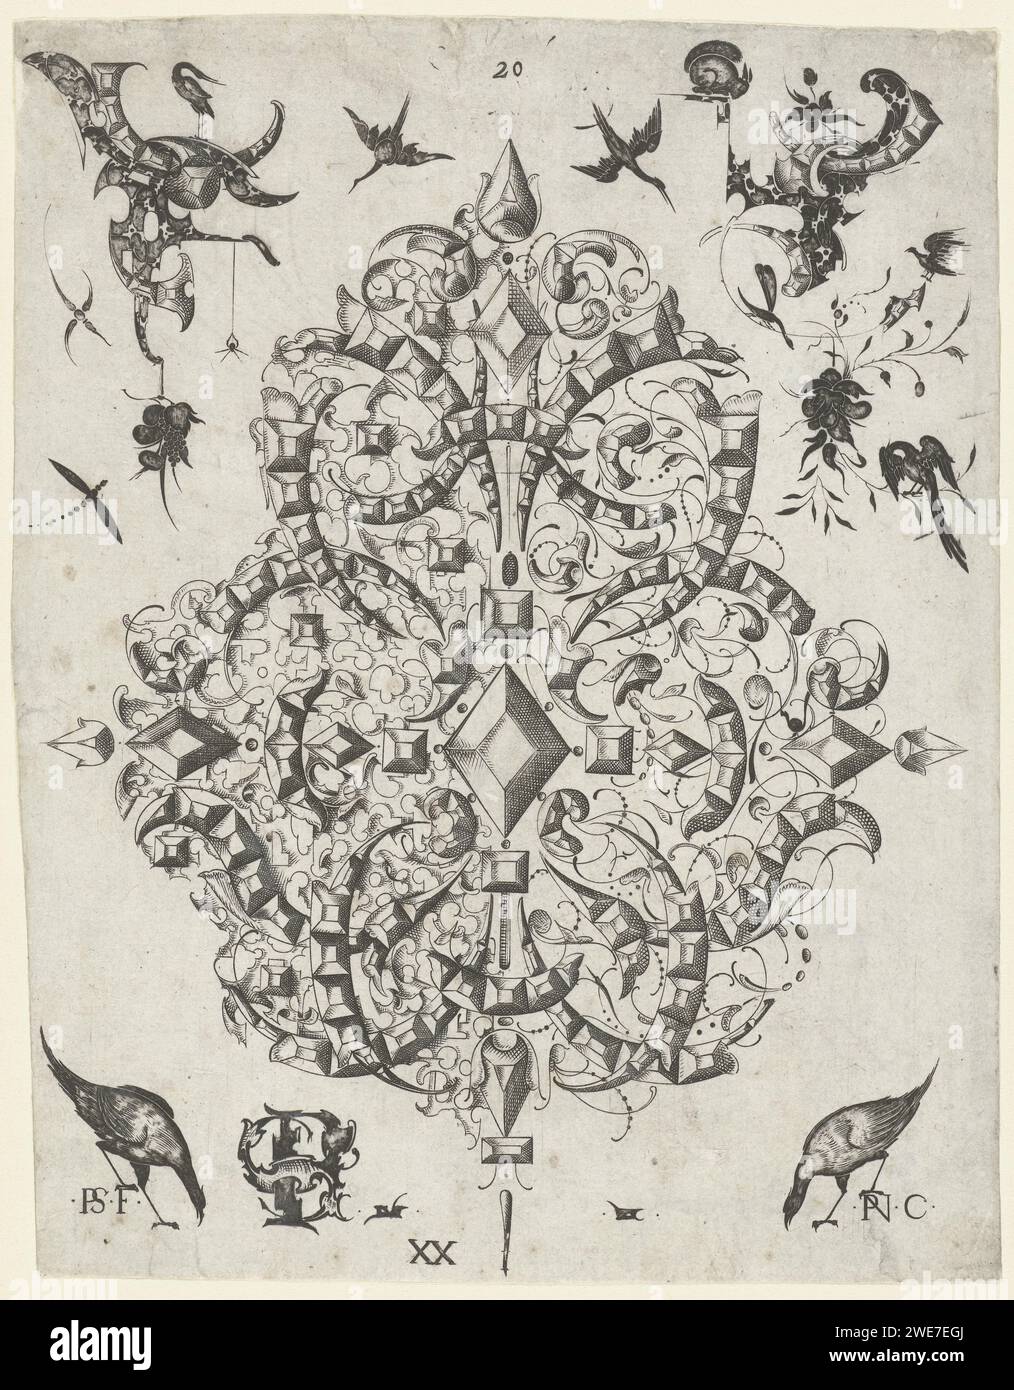 Jewel in the Shape of an Orfèvrerie Bouquet, Pierre Nolin (possibly), after Peter Symony, 1621 print Left and top right two small goldsmids motifs. Leaf from series of 24 sheets, 18 engraved by Isaac Brun and six by the monogrammist PM (probably Pierre Nolin). print maker: Germany (possibly)after design by: Germany (possibly)publisher: Straatsburg (Frankrijk) paper engraving Stock Photo